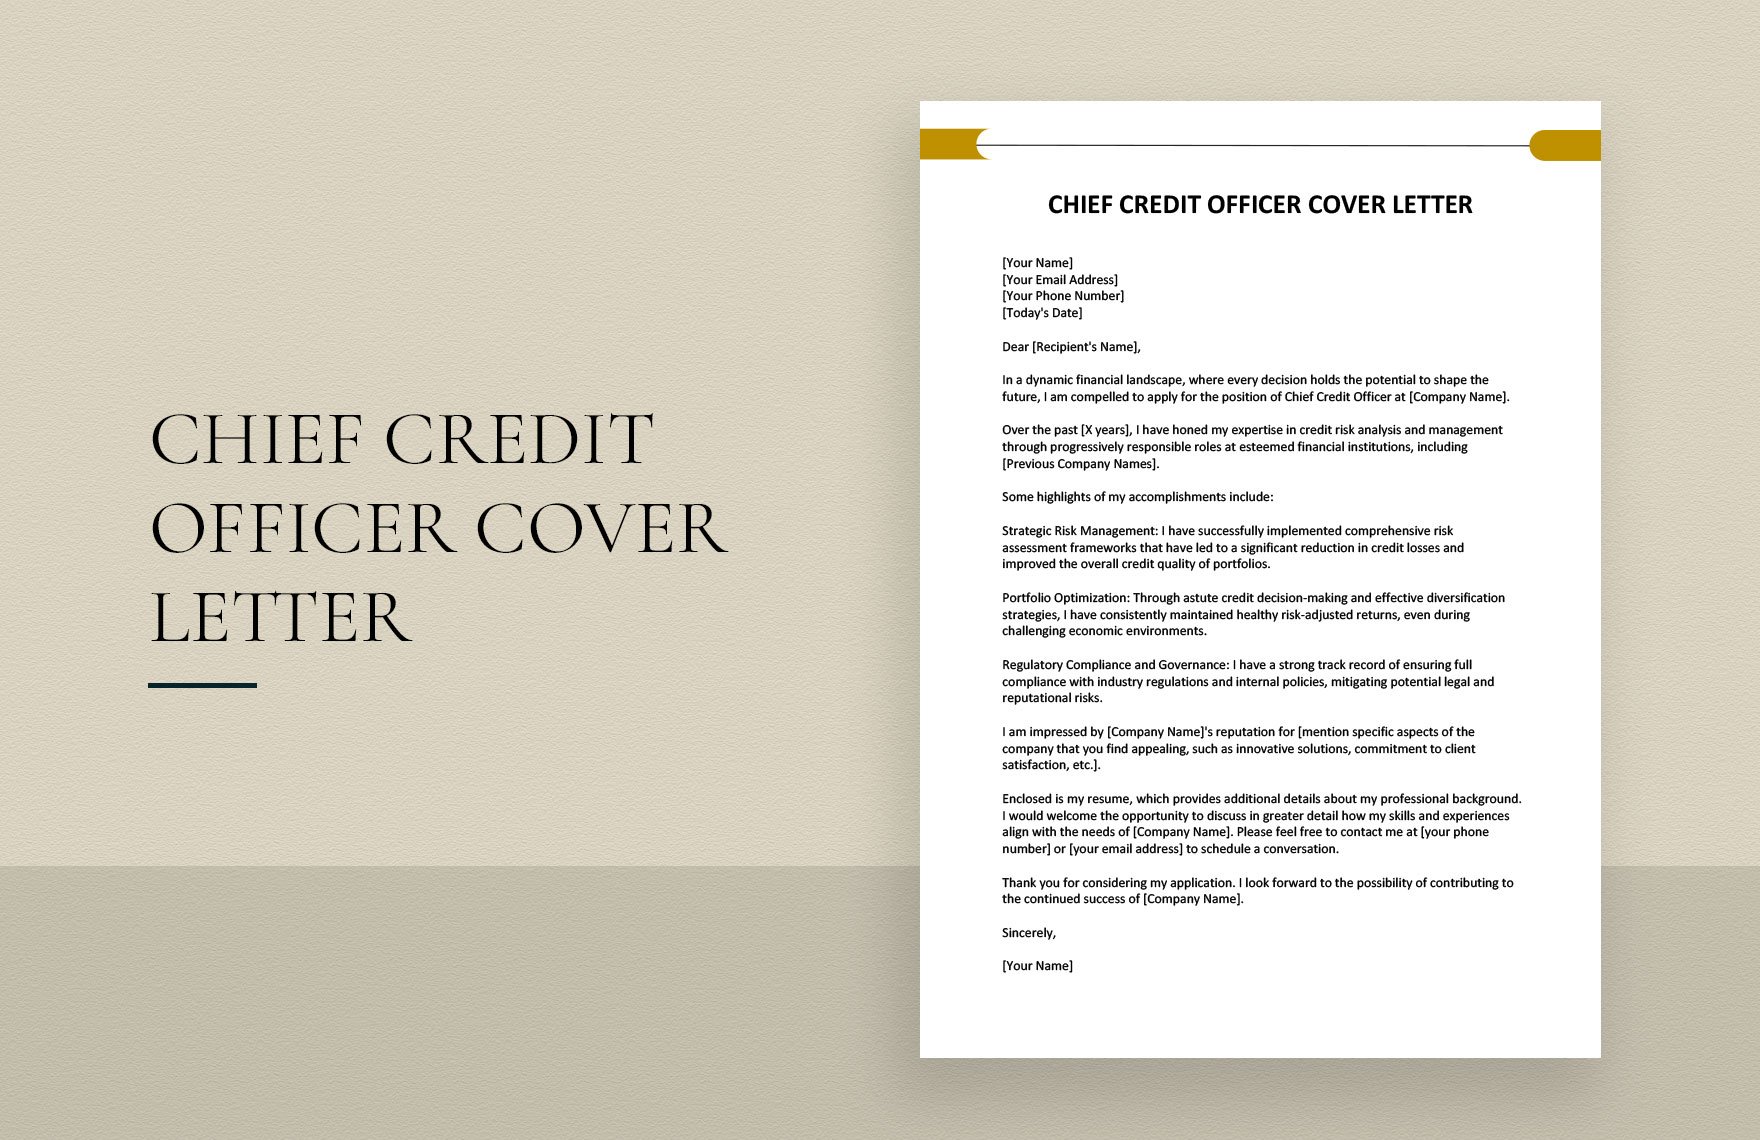 Chief Credit Officer Cover Letter